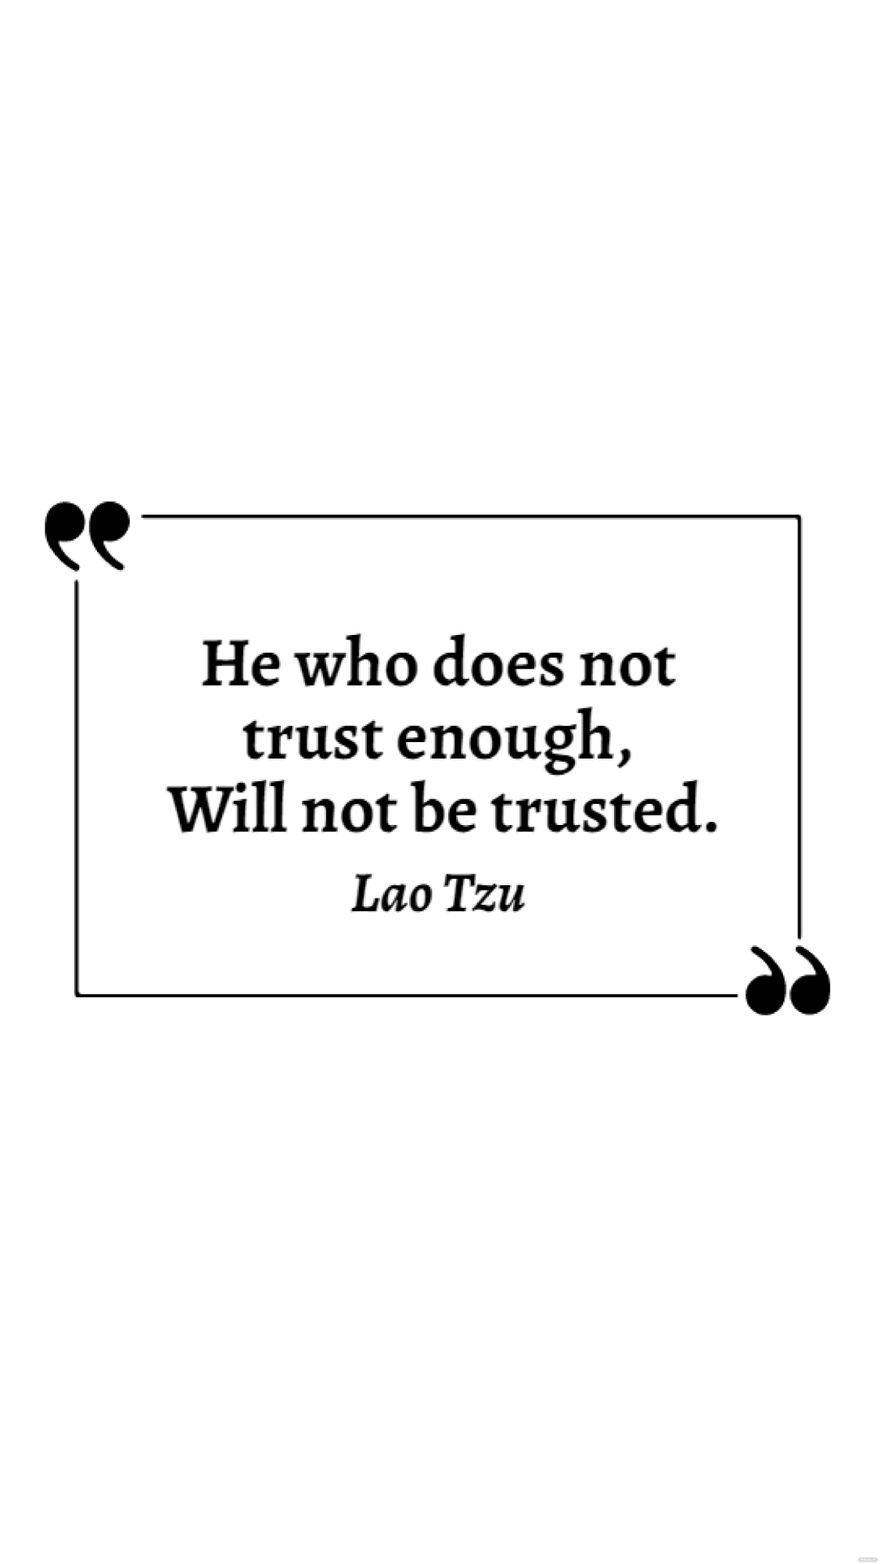 Lao Tzu - He who does not trust enough, Will not be trusted.